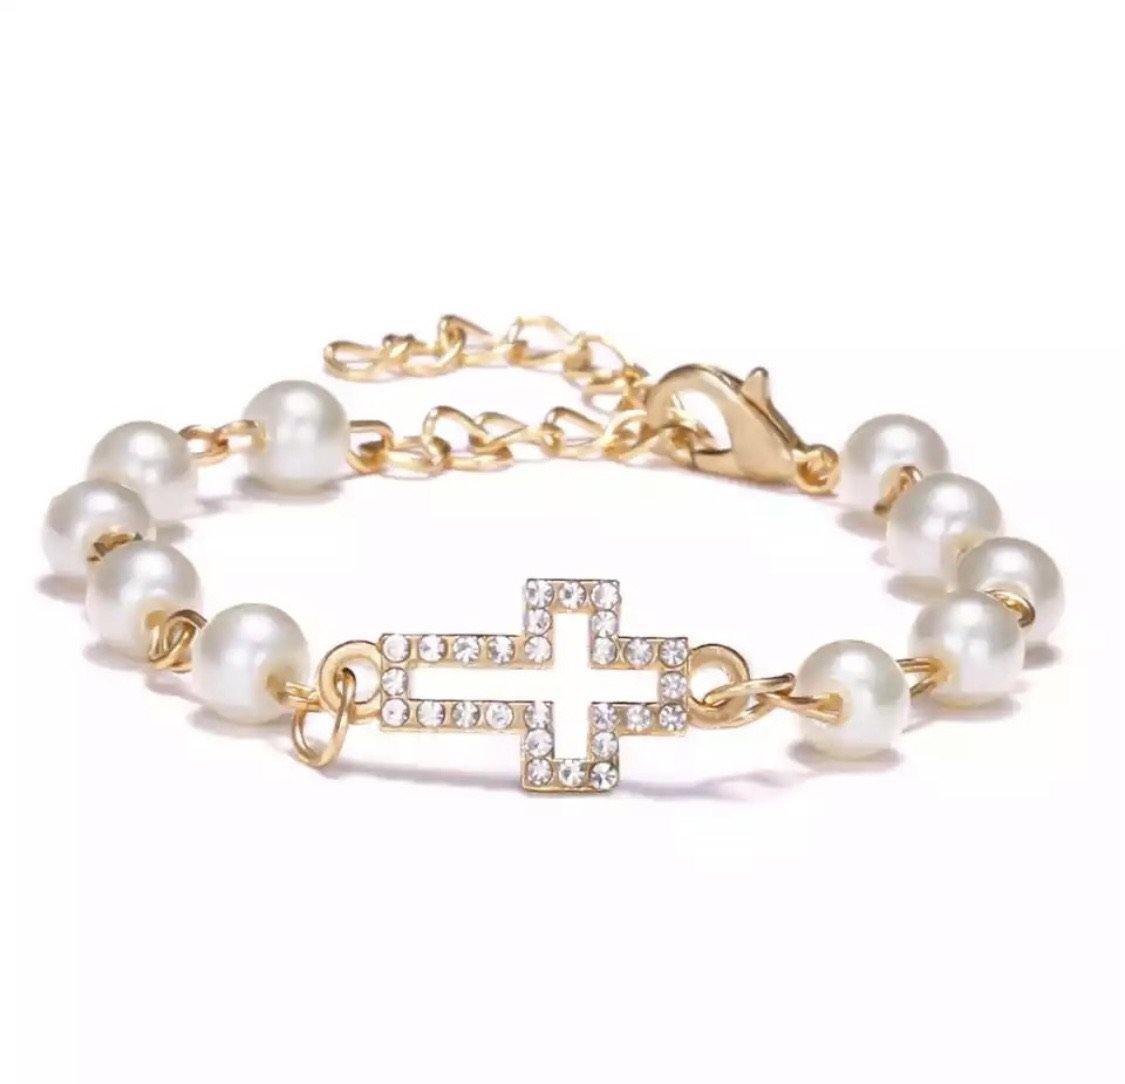 Cross bracelets Pearls, gold & rhinestones Womens fashion jewelry - Stacy's Pink Martini Boutique